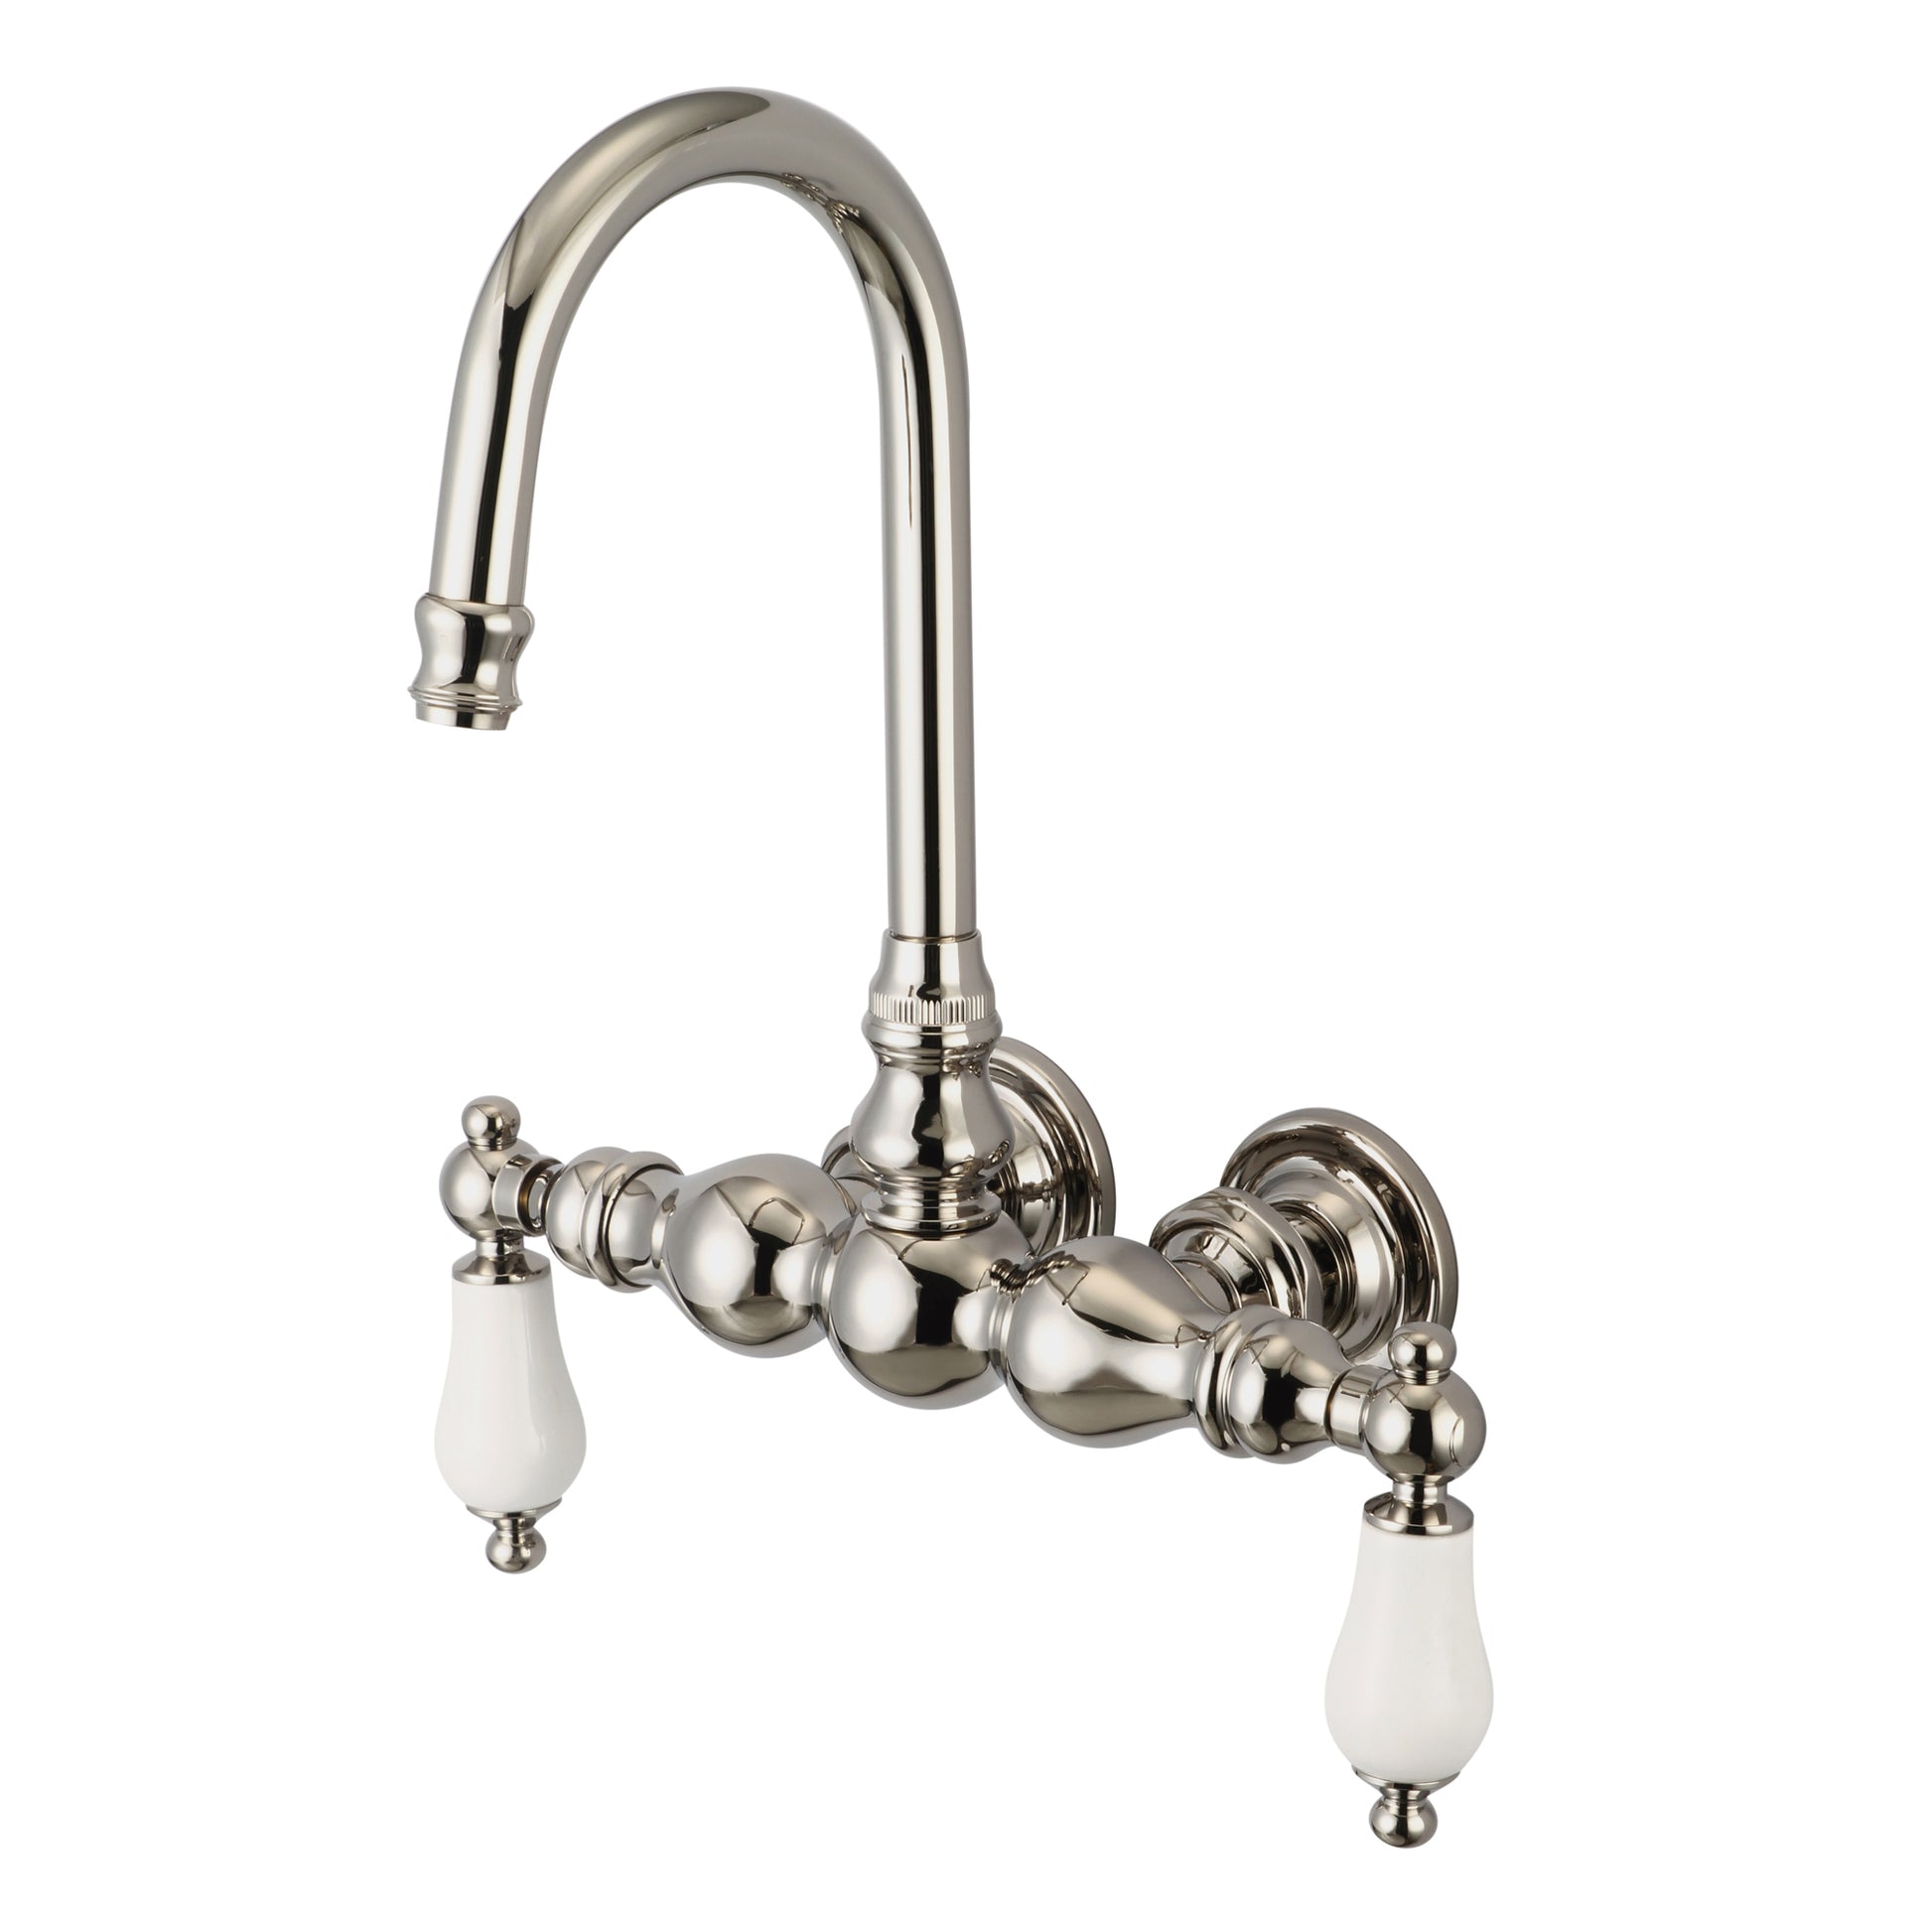 Vintage Classic 3.375" Center Wall Mount Tub Faucet With Gooseneck Spout & Straight Wall Connector in Polished Nickel Finish, With Porcelain Lever Handles Without labels